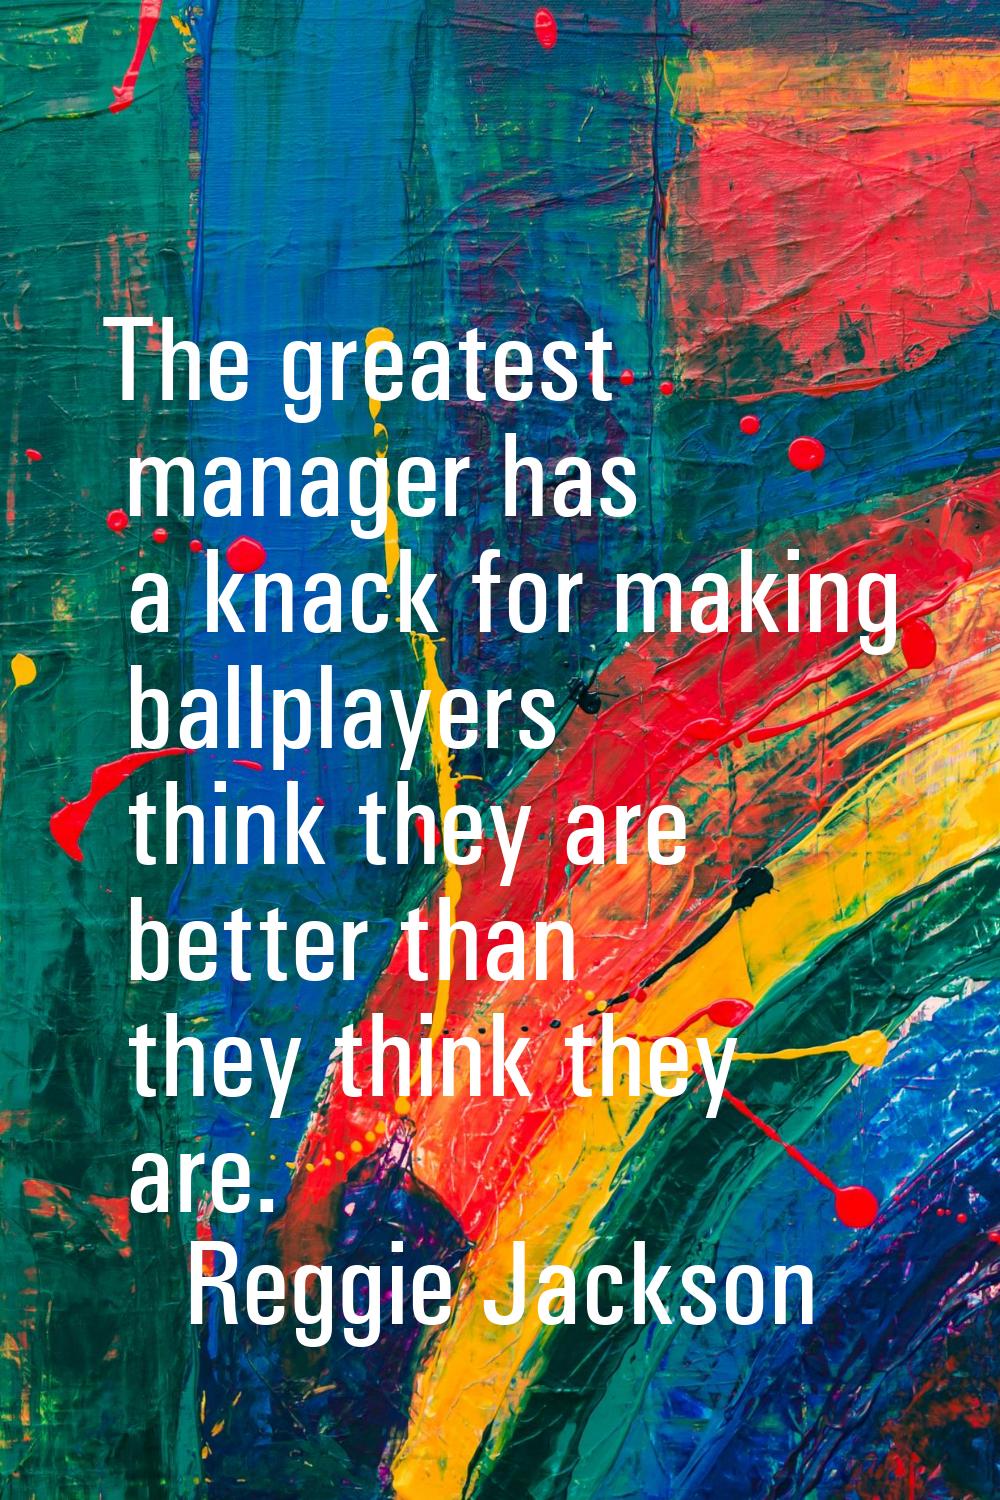 The greatest manager has a knack for making ballplayers think they are better than they think they 